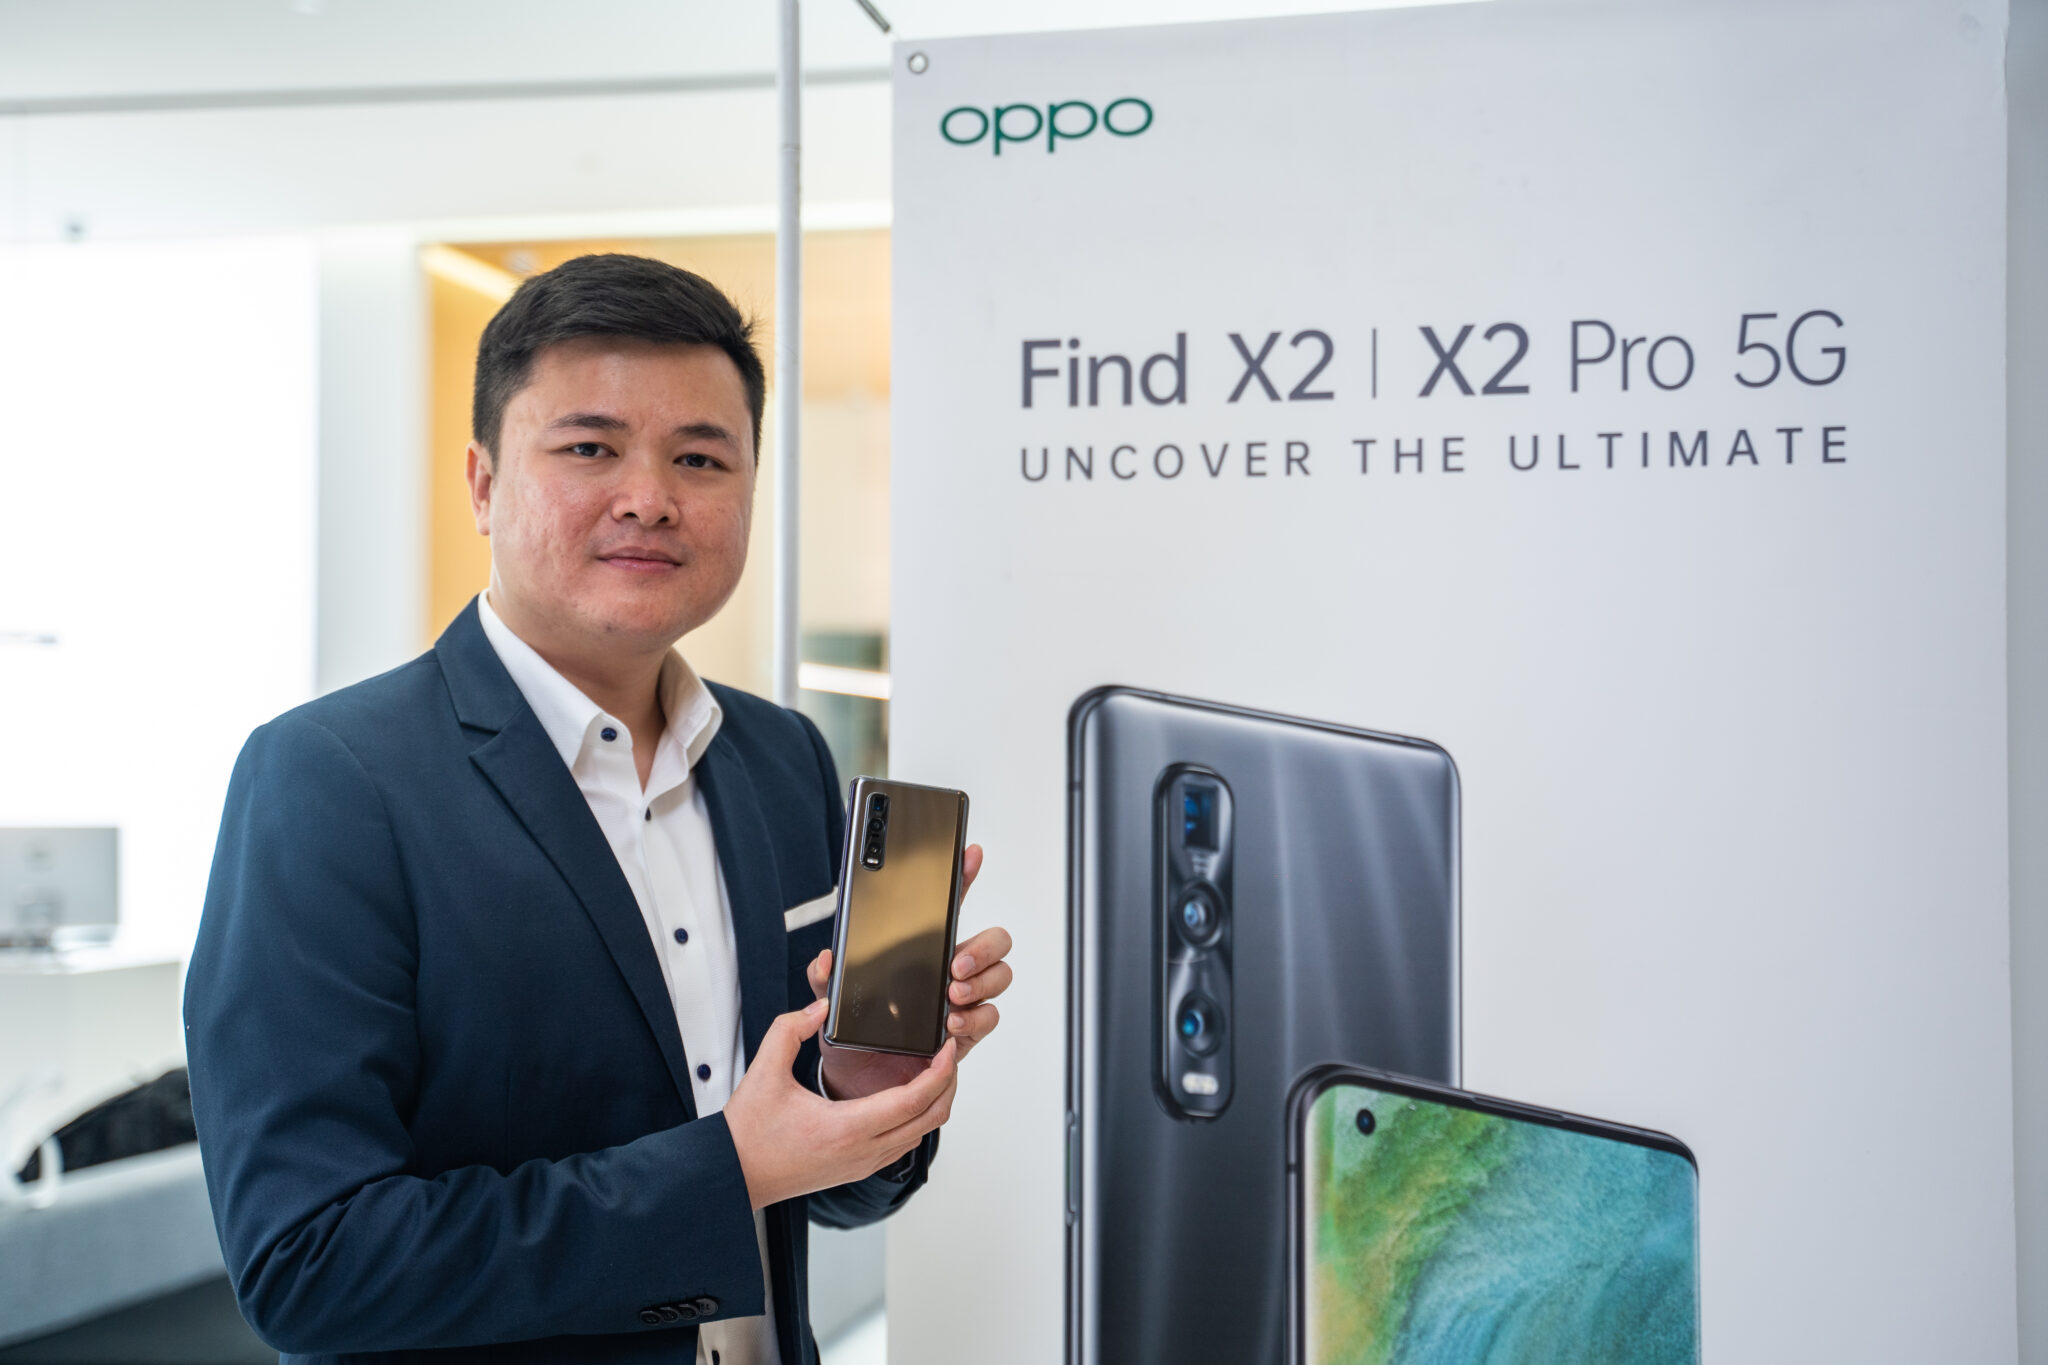 OPPO Find X2 display